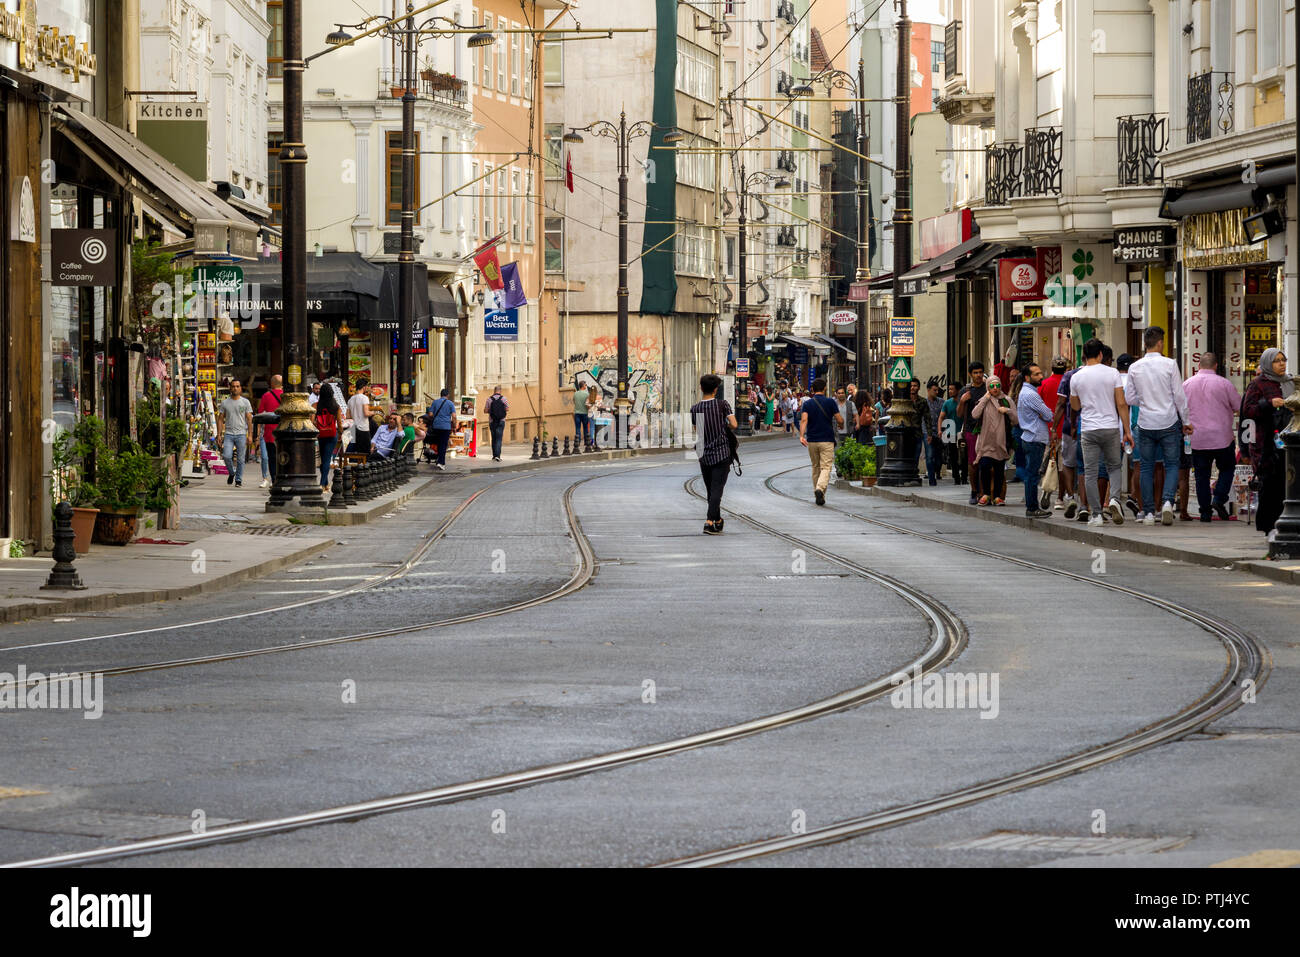 Hüdavendigar street with tram lines running along it as people walk on the pavement alongside, Istanbul, Turkey Stock Photo